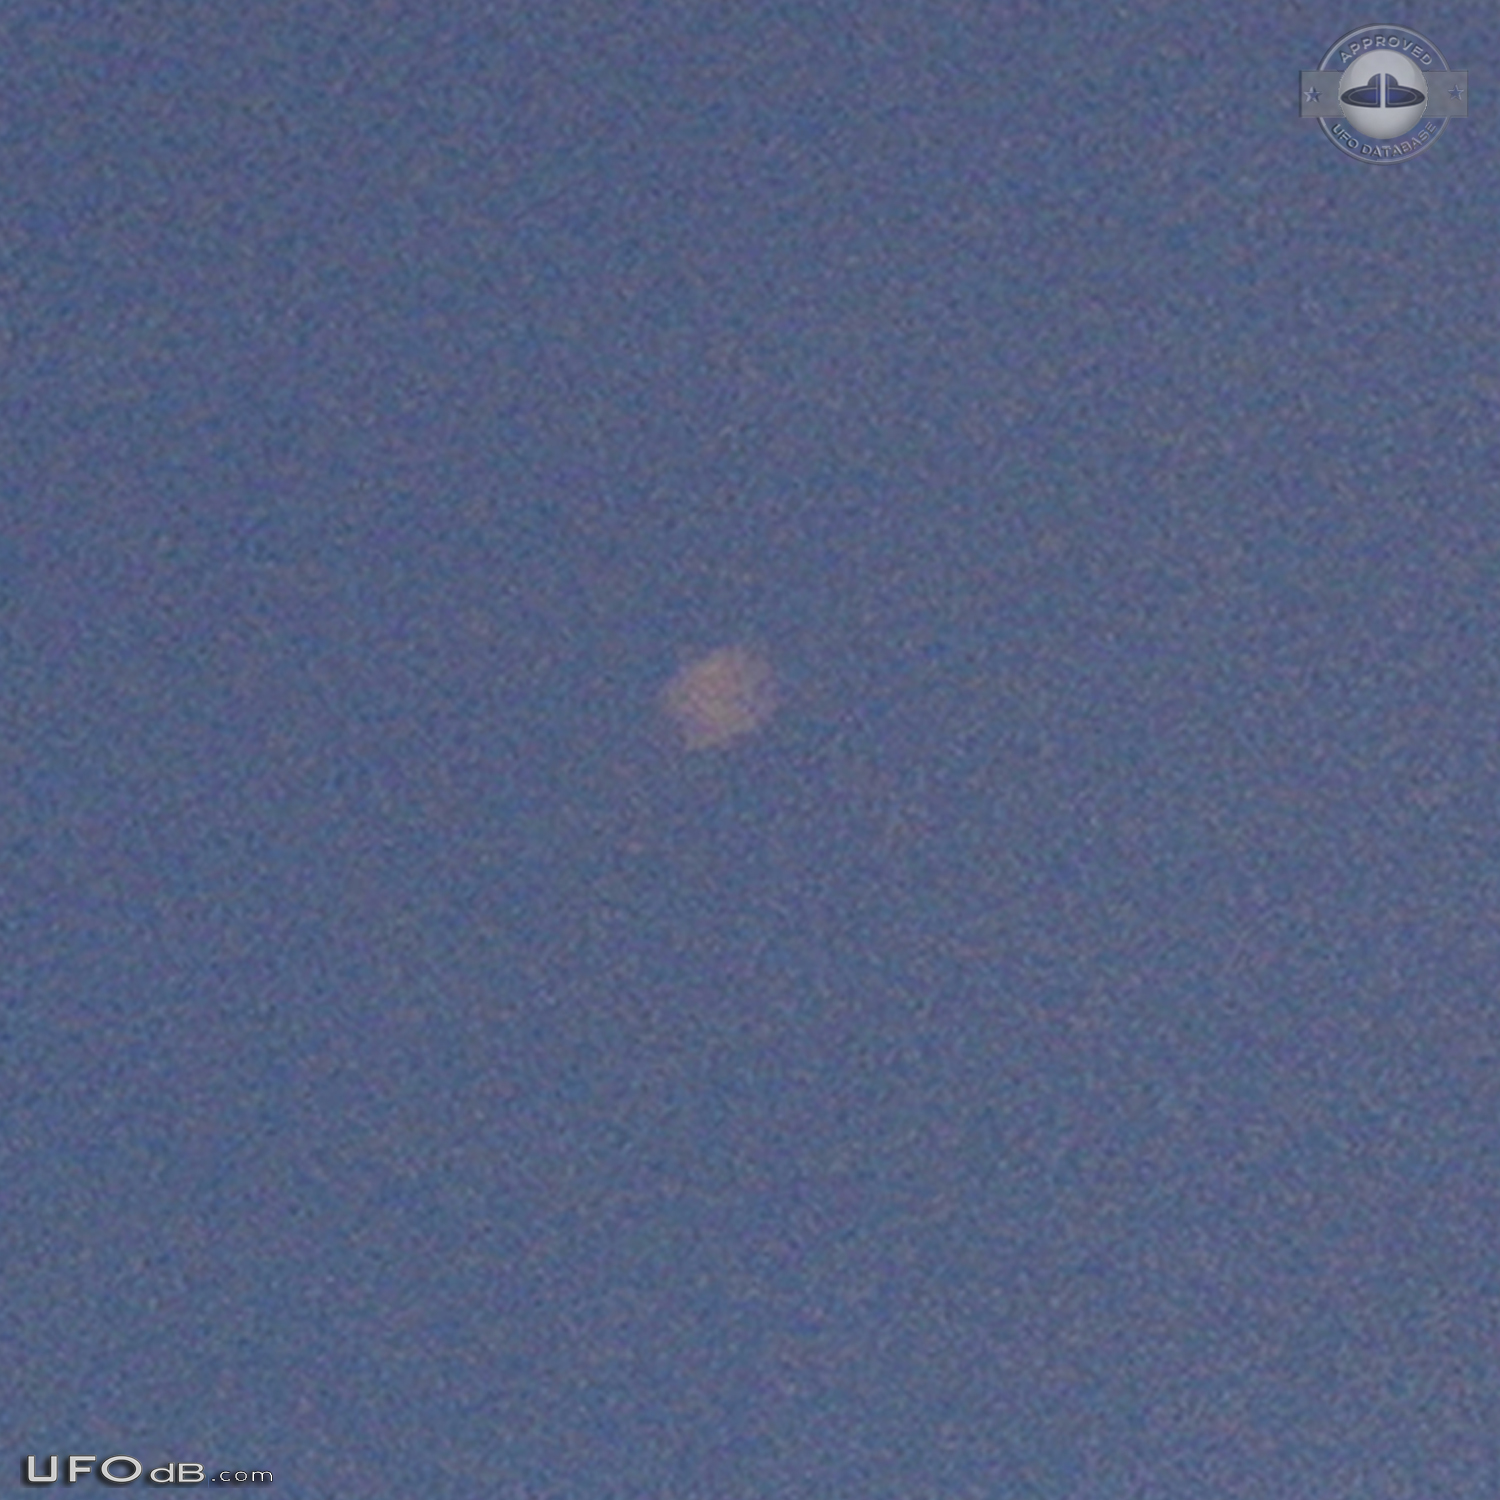 noticed a light passing under the moon in Pendleton Indiana USA 2015 UFO Picture #714-3